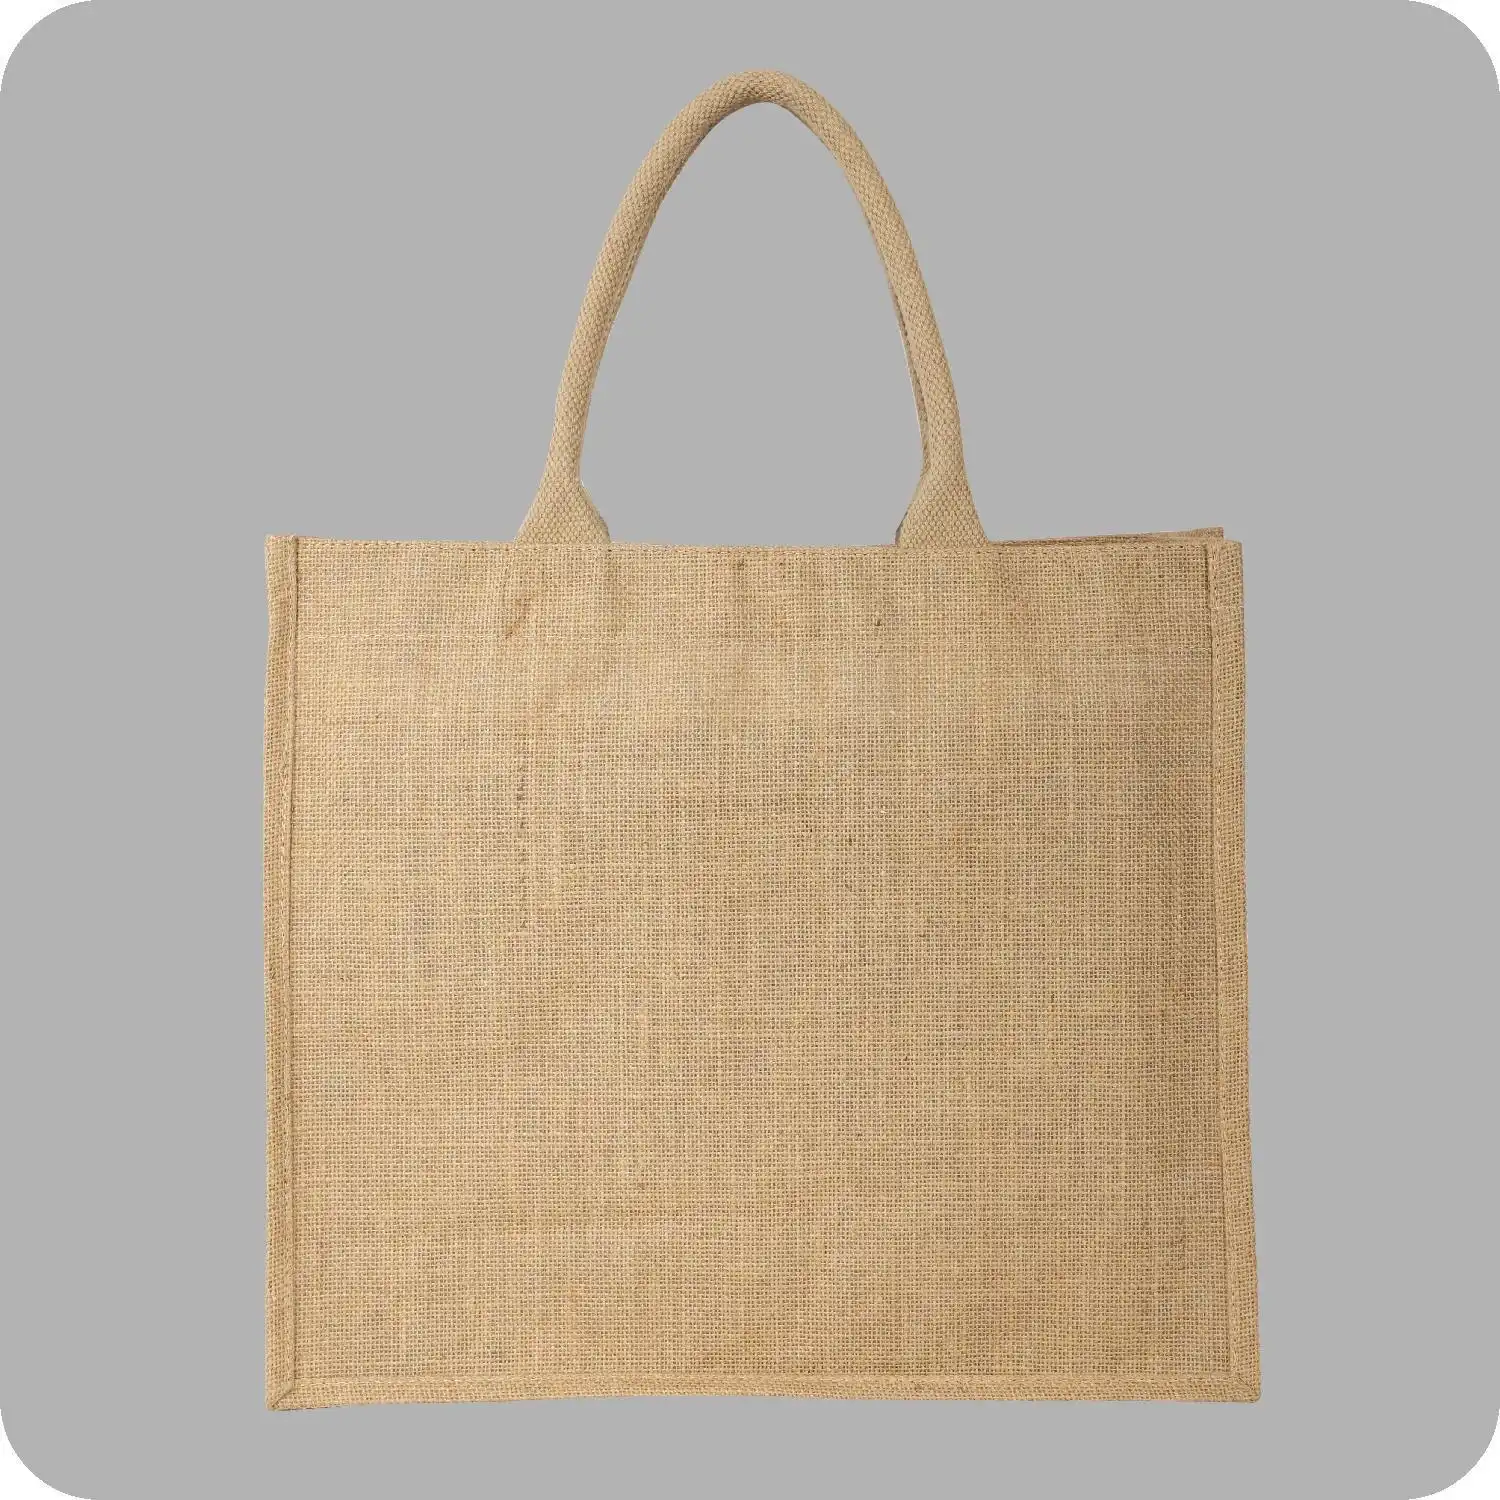 Open Closure Jute Carry Bags Ideal for Shopping Purpose